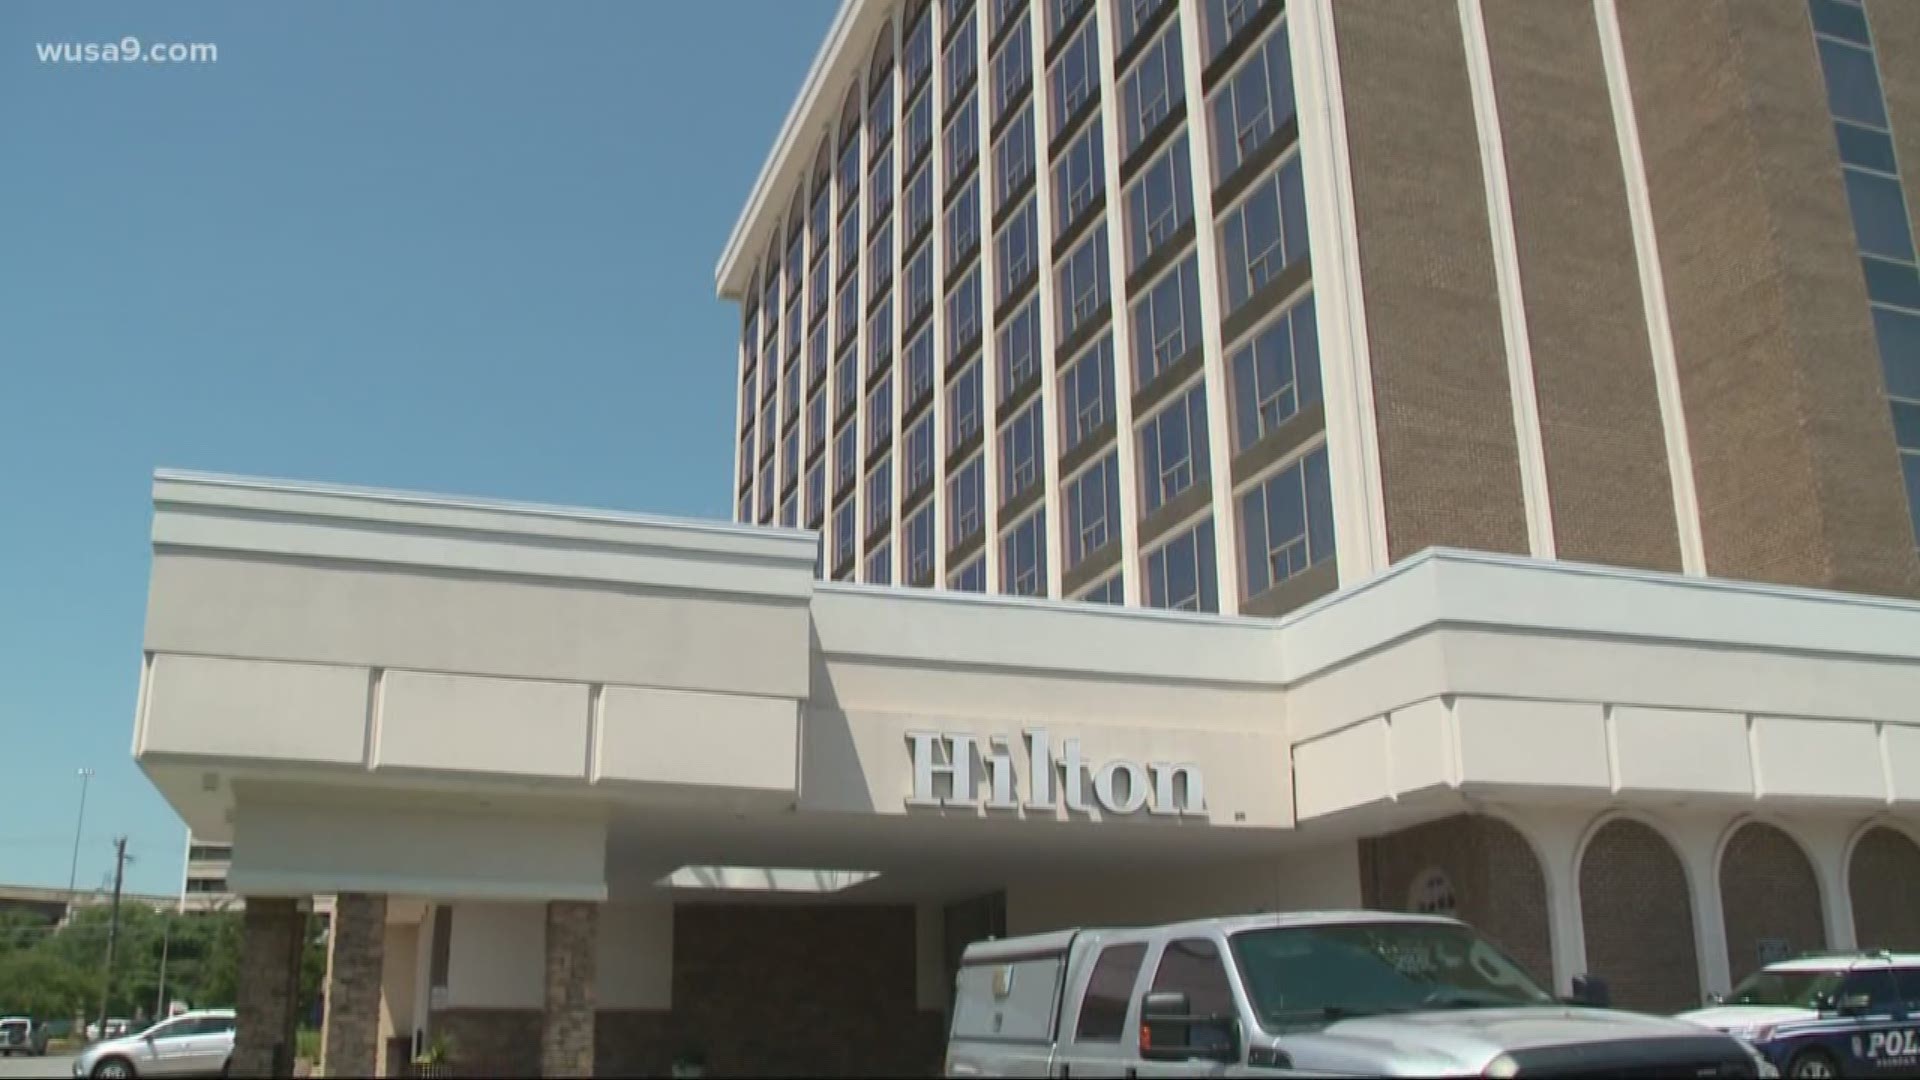 A 55-year-old woman was stabbed to death in a Springfield, Virginia hotel around 3 a.m. on Saturday. Fairfax County police have charged Matthew Cook, 34, of Louisana, with second degree murder for her death.